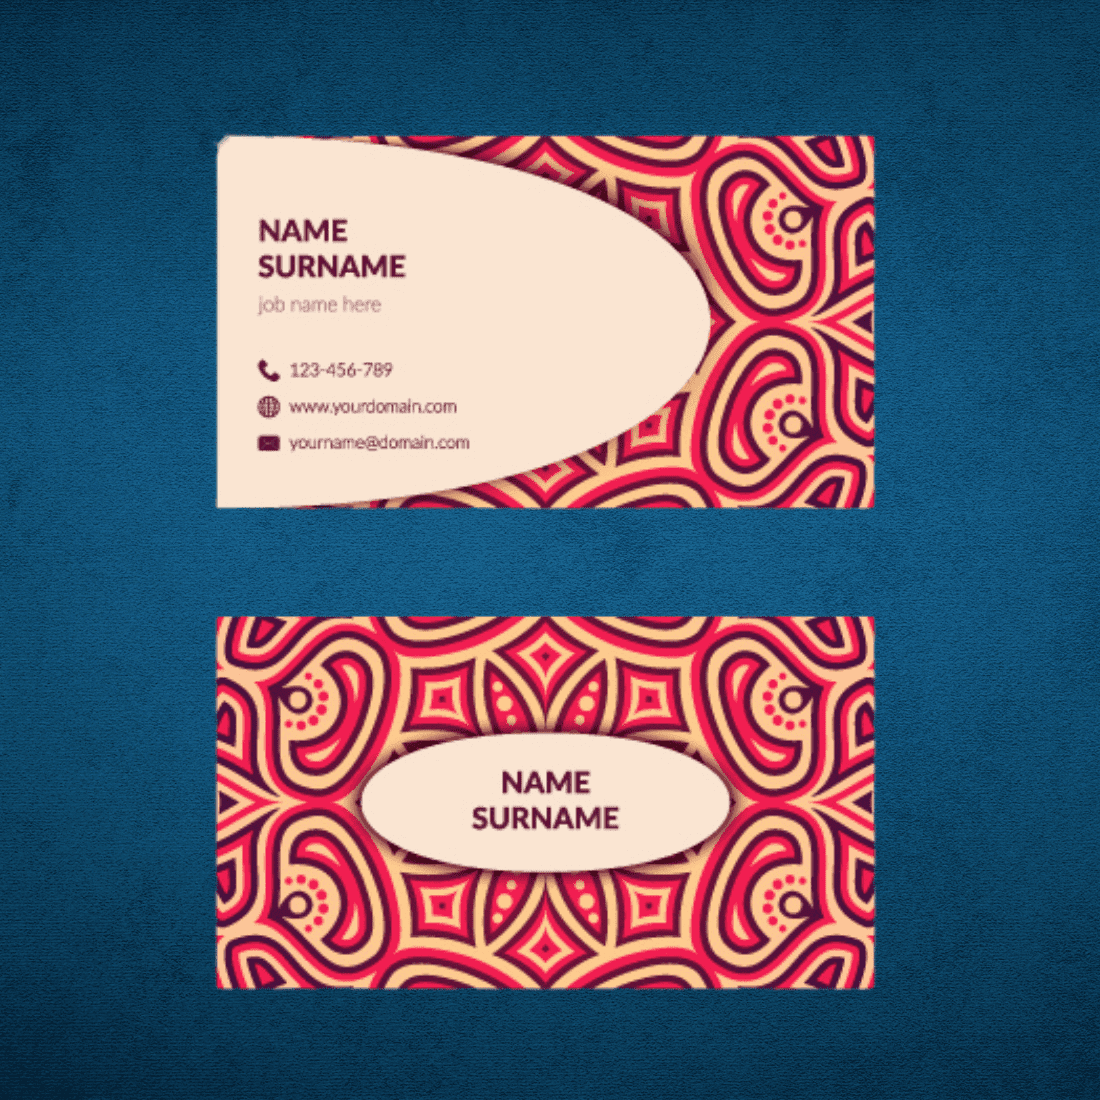 12 Editable Business Card Vintage Decorative - Only $5 preview image.